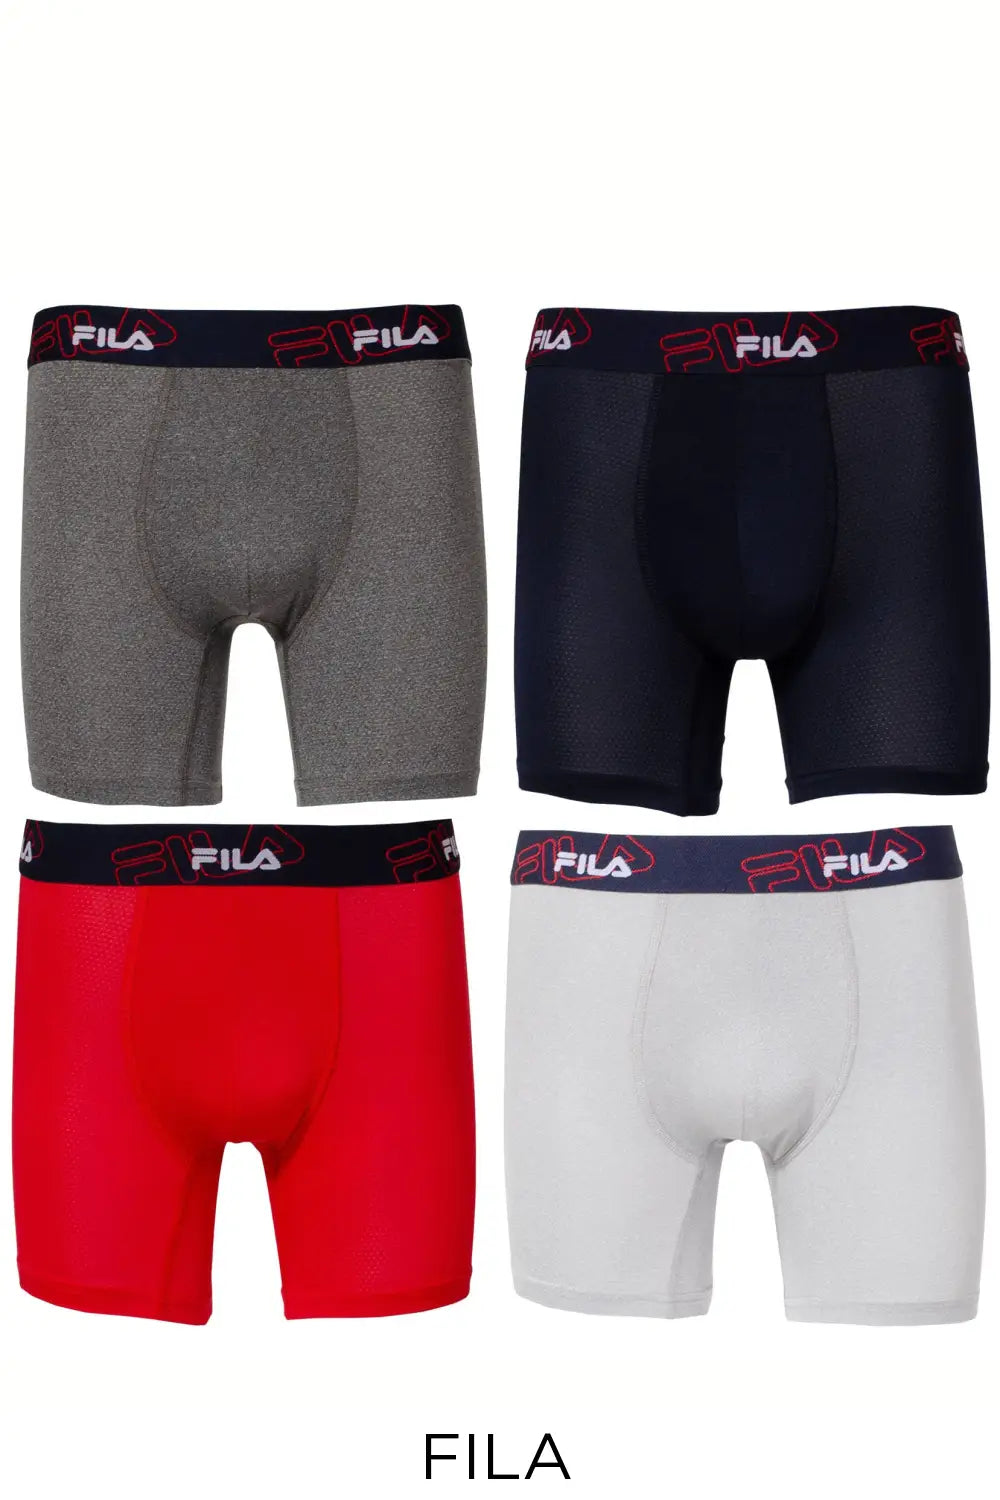 Red/Navy/Grey - Breathable Boxer Briefs 4 Pack